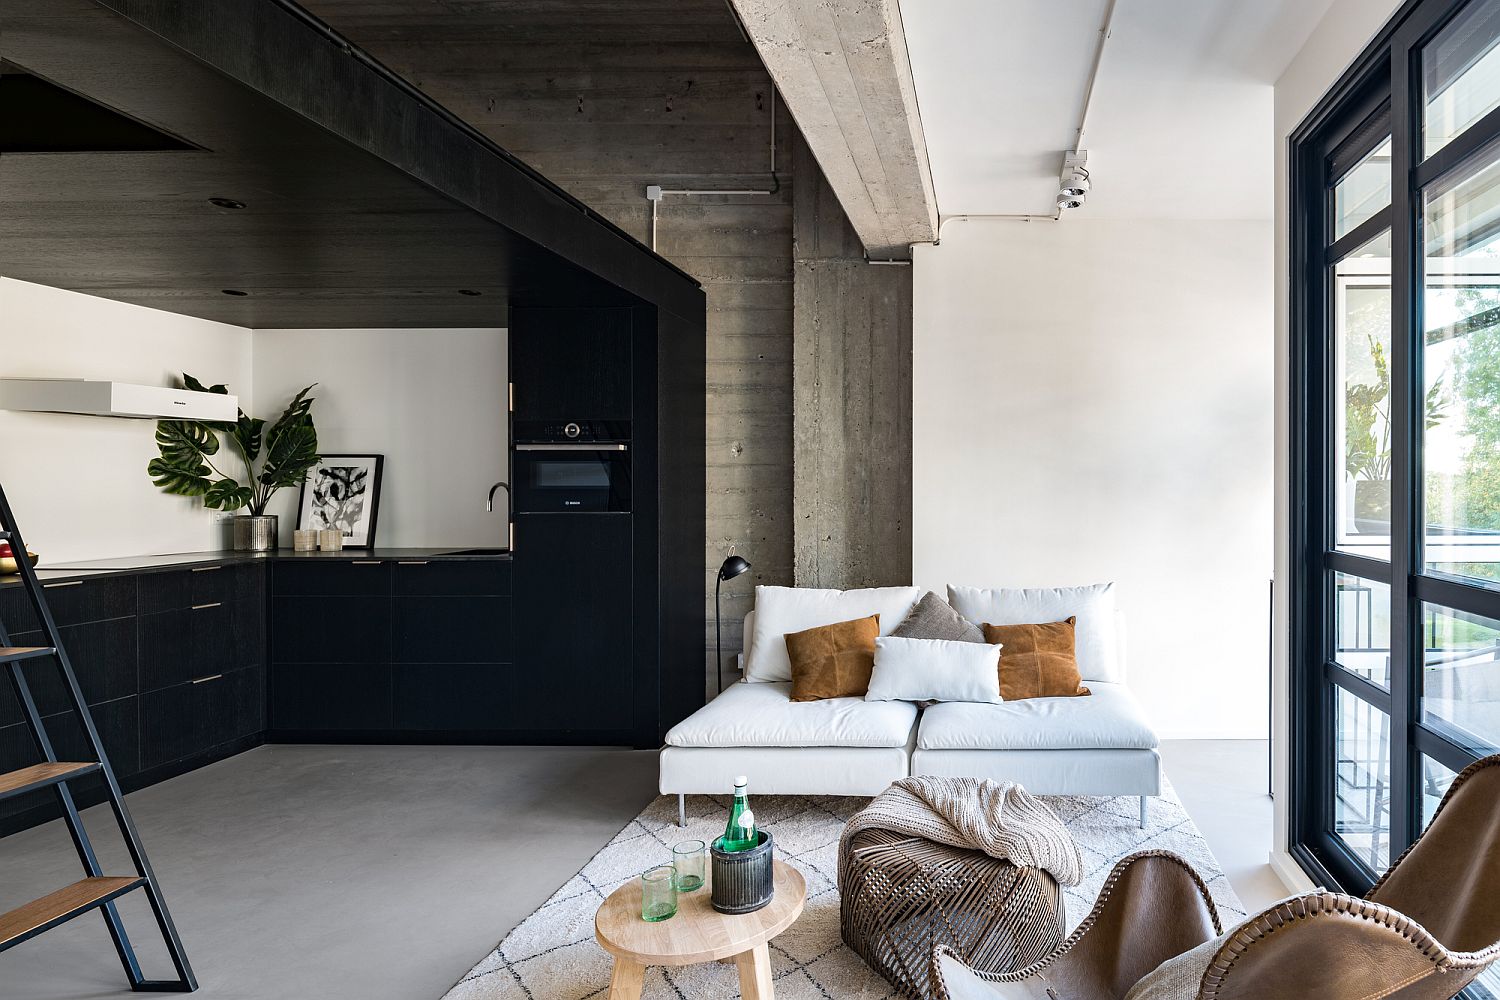 Exquisite Urban Lofts in Amsterdam Master Space, Style and Sophistication